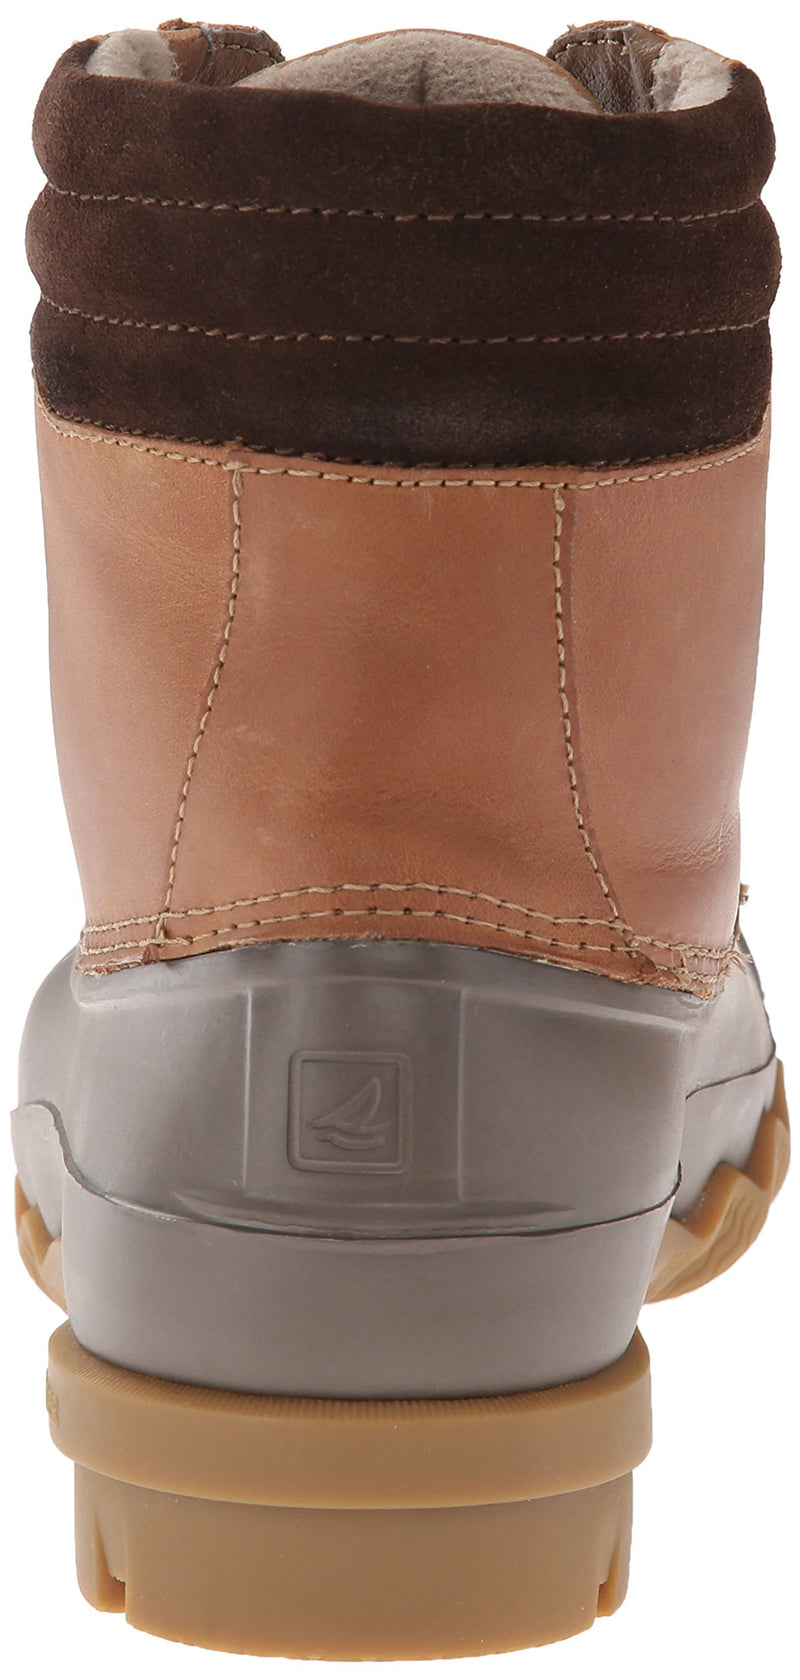 Sperry Mens Avenue Duck Boots, Tan/Brown, 12 - Epivend